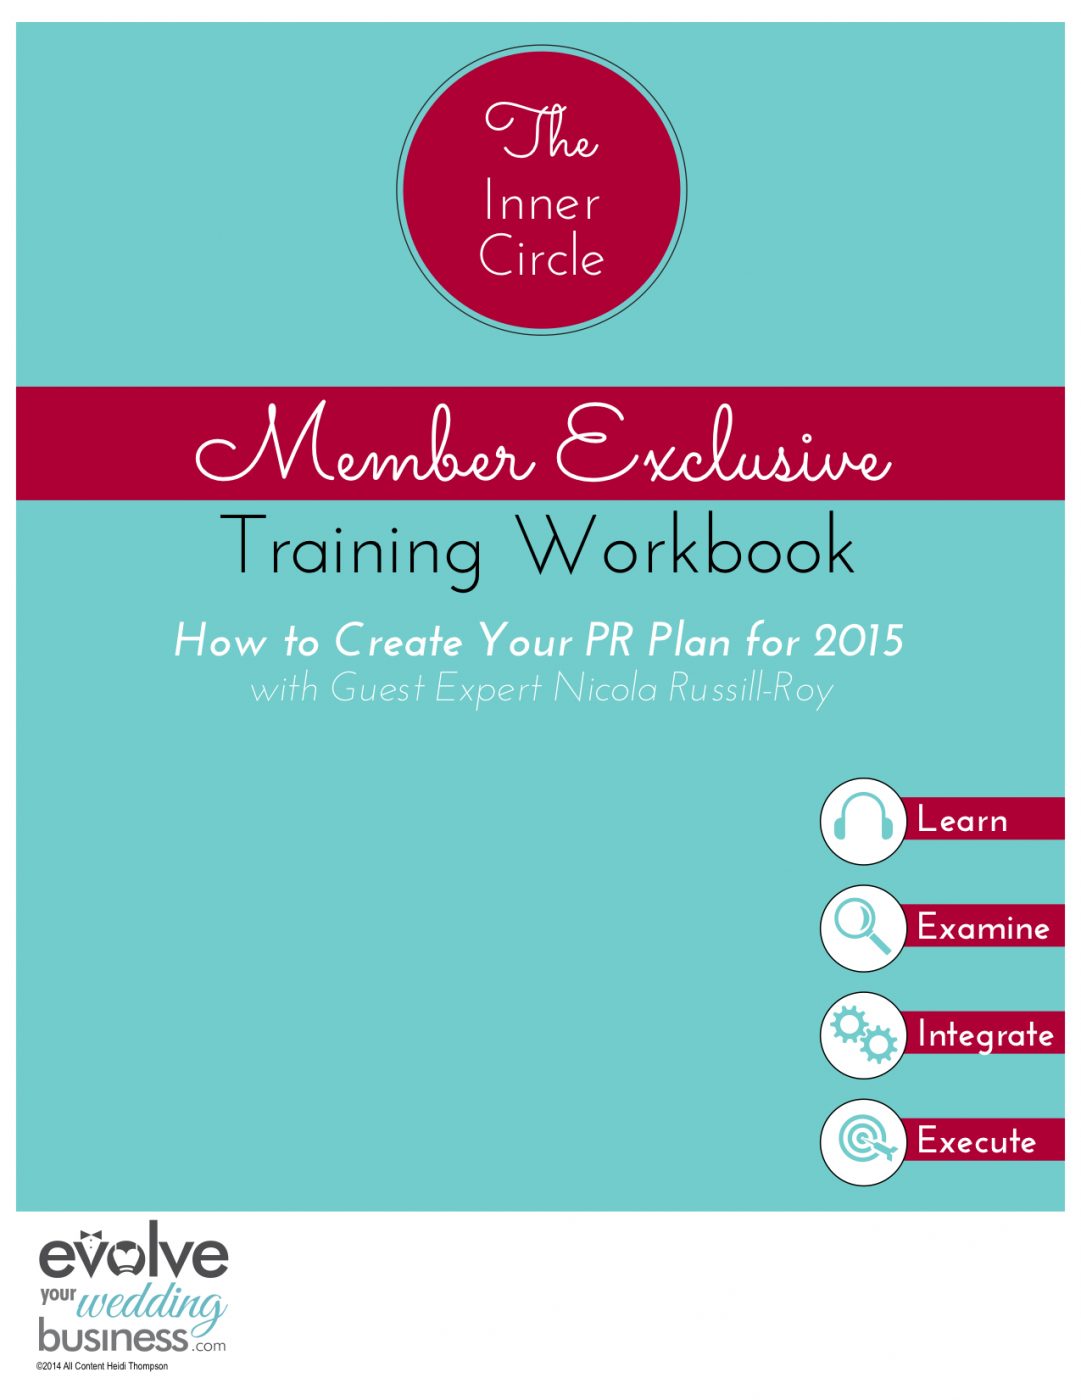 How To Create Your PR Plan For 2015 Workbook